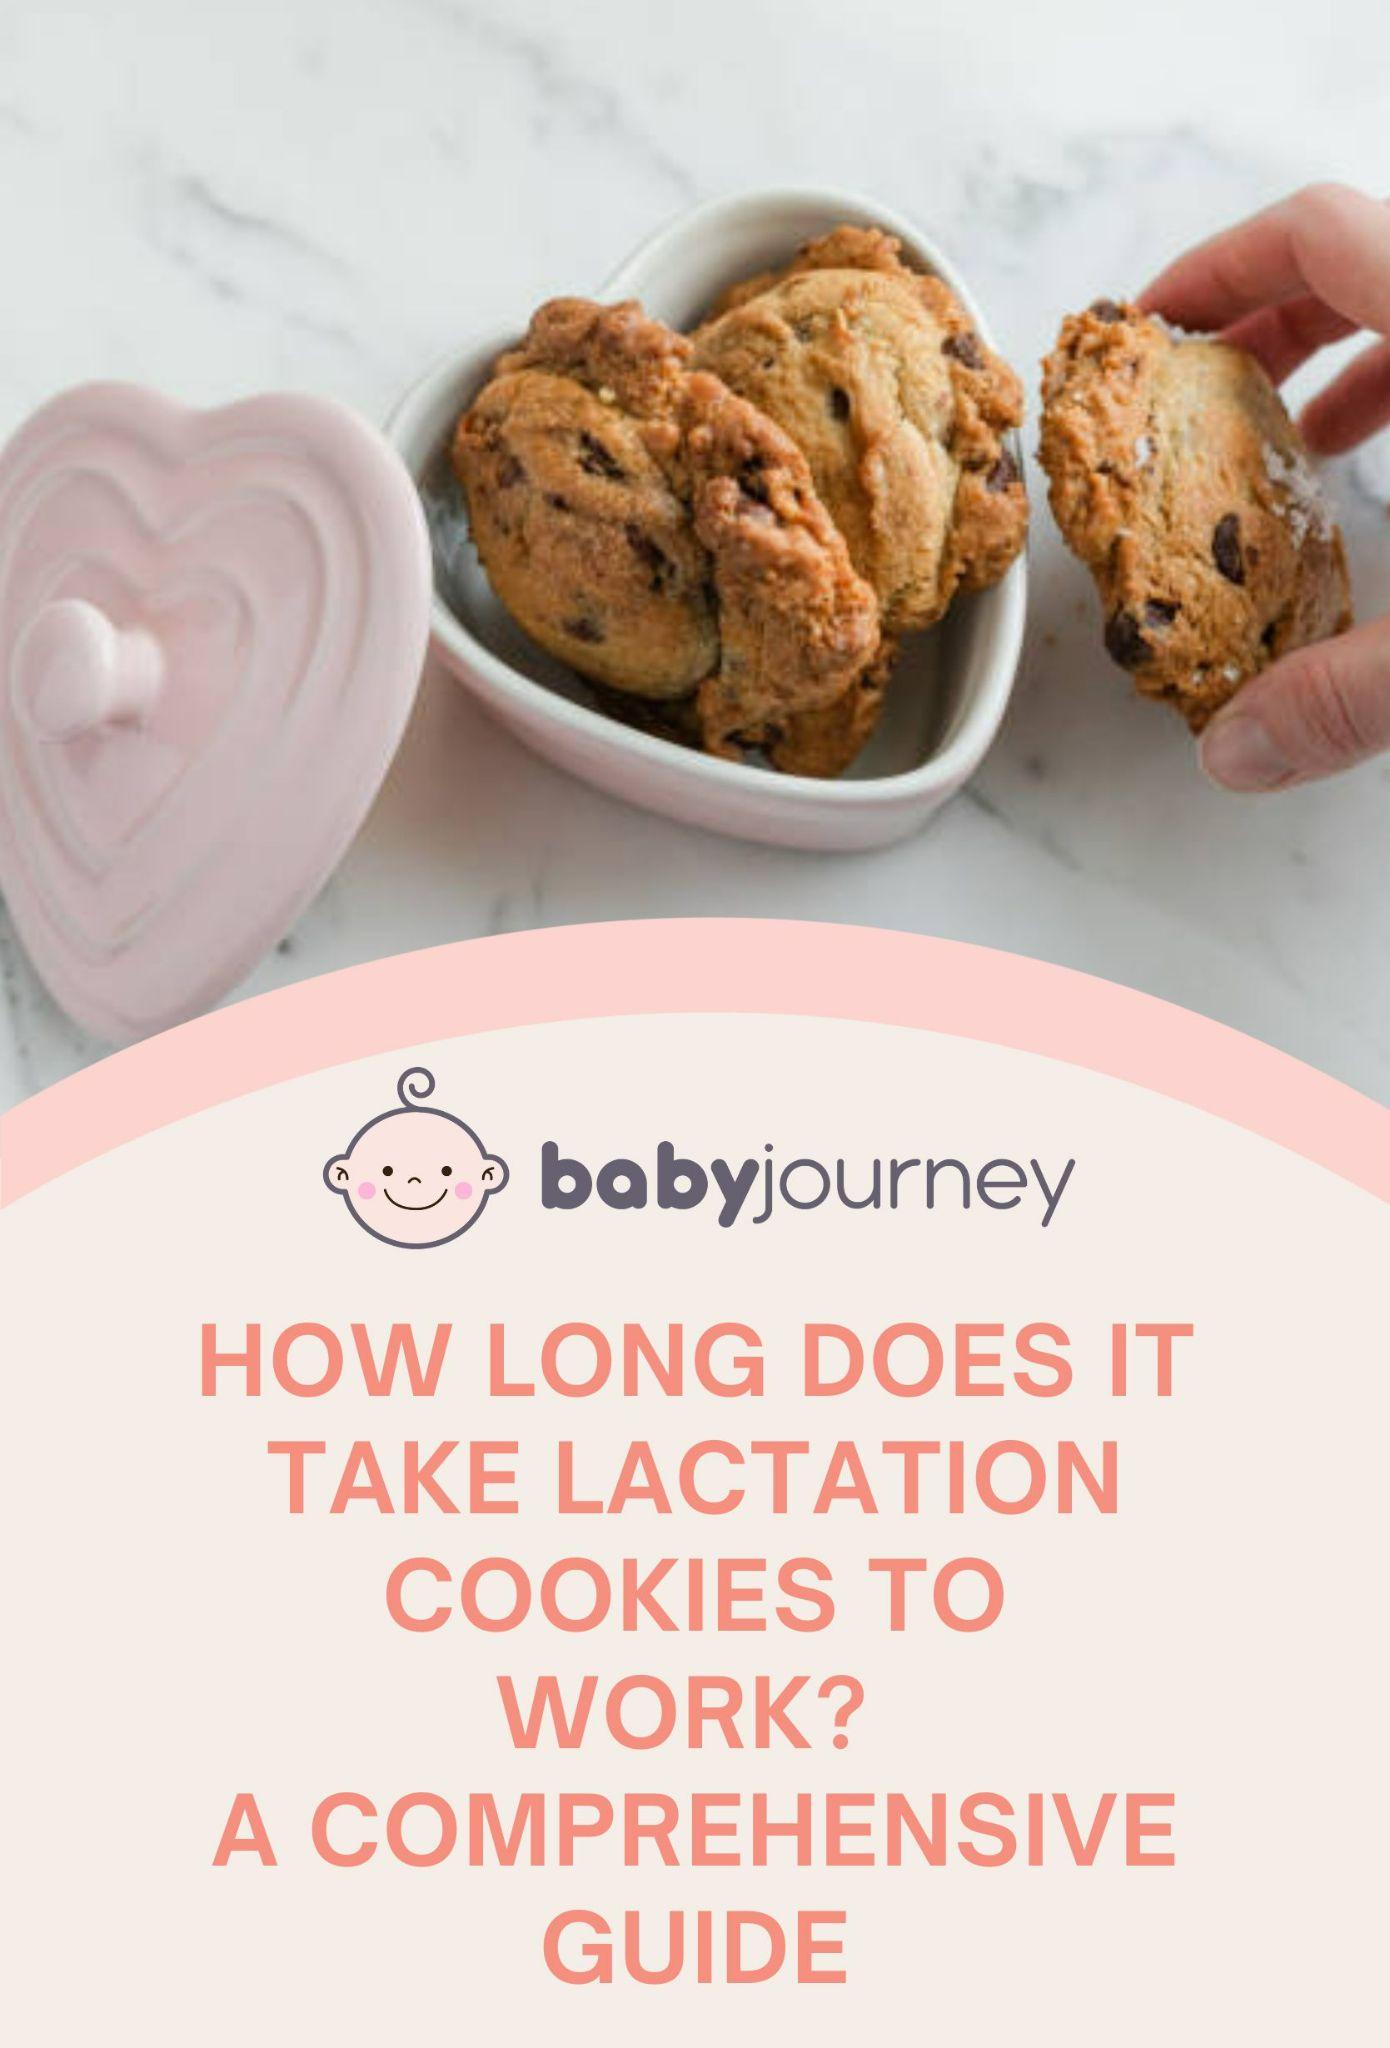 How Long Does It Take Lactation Cookies to Work? A Comprehensive Guide Pinterest Image - Baby Journey 